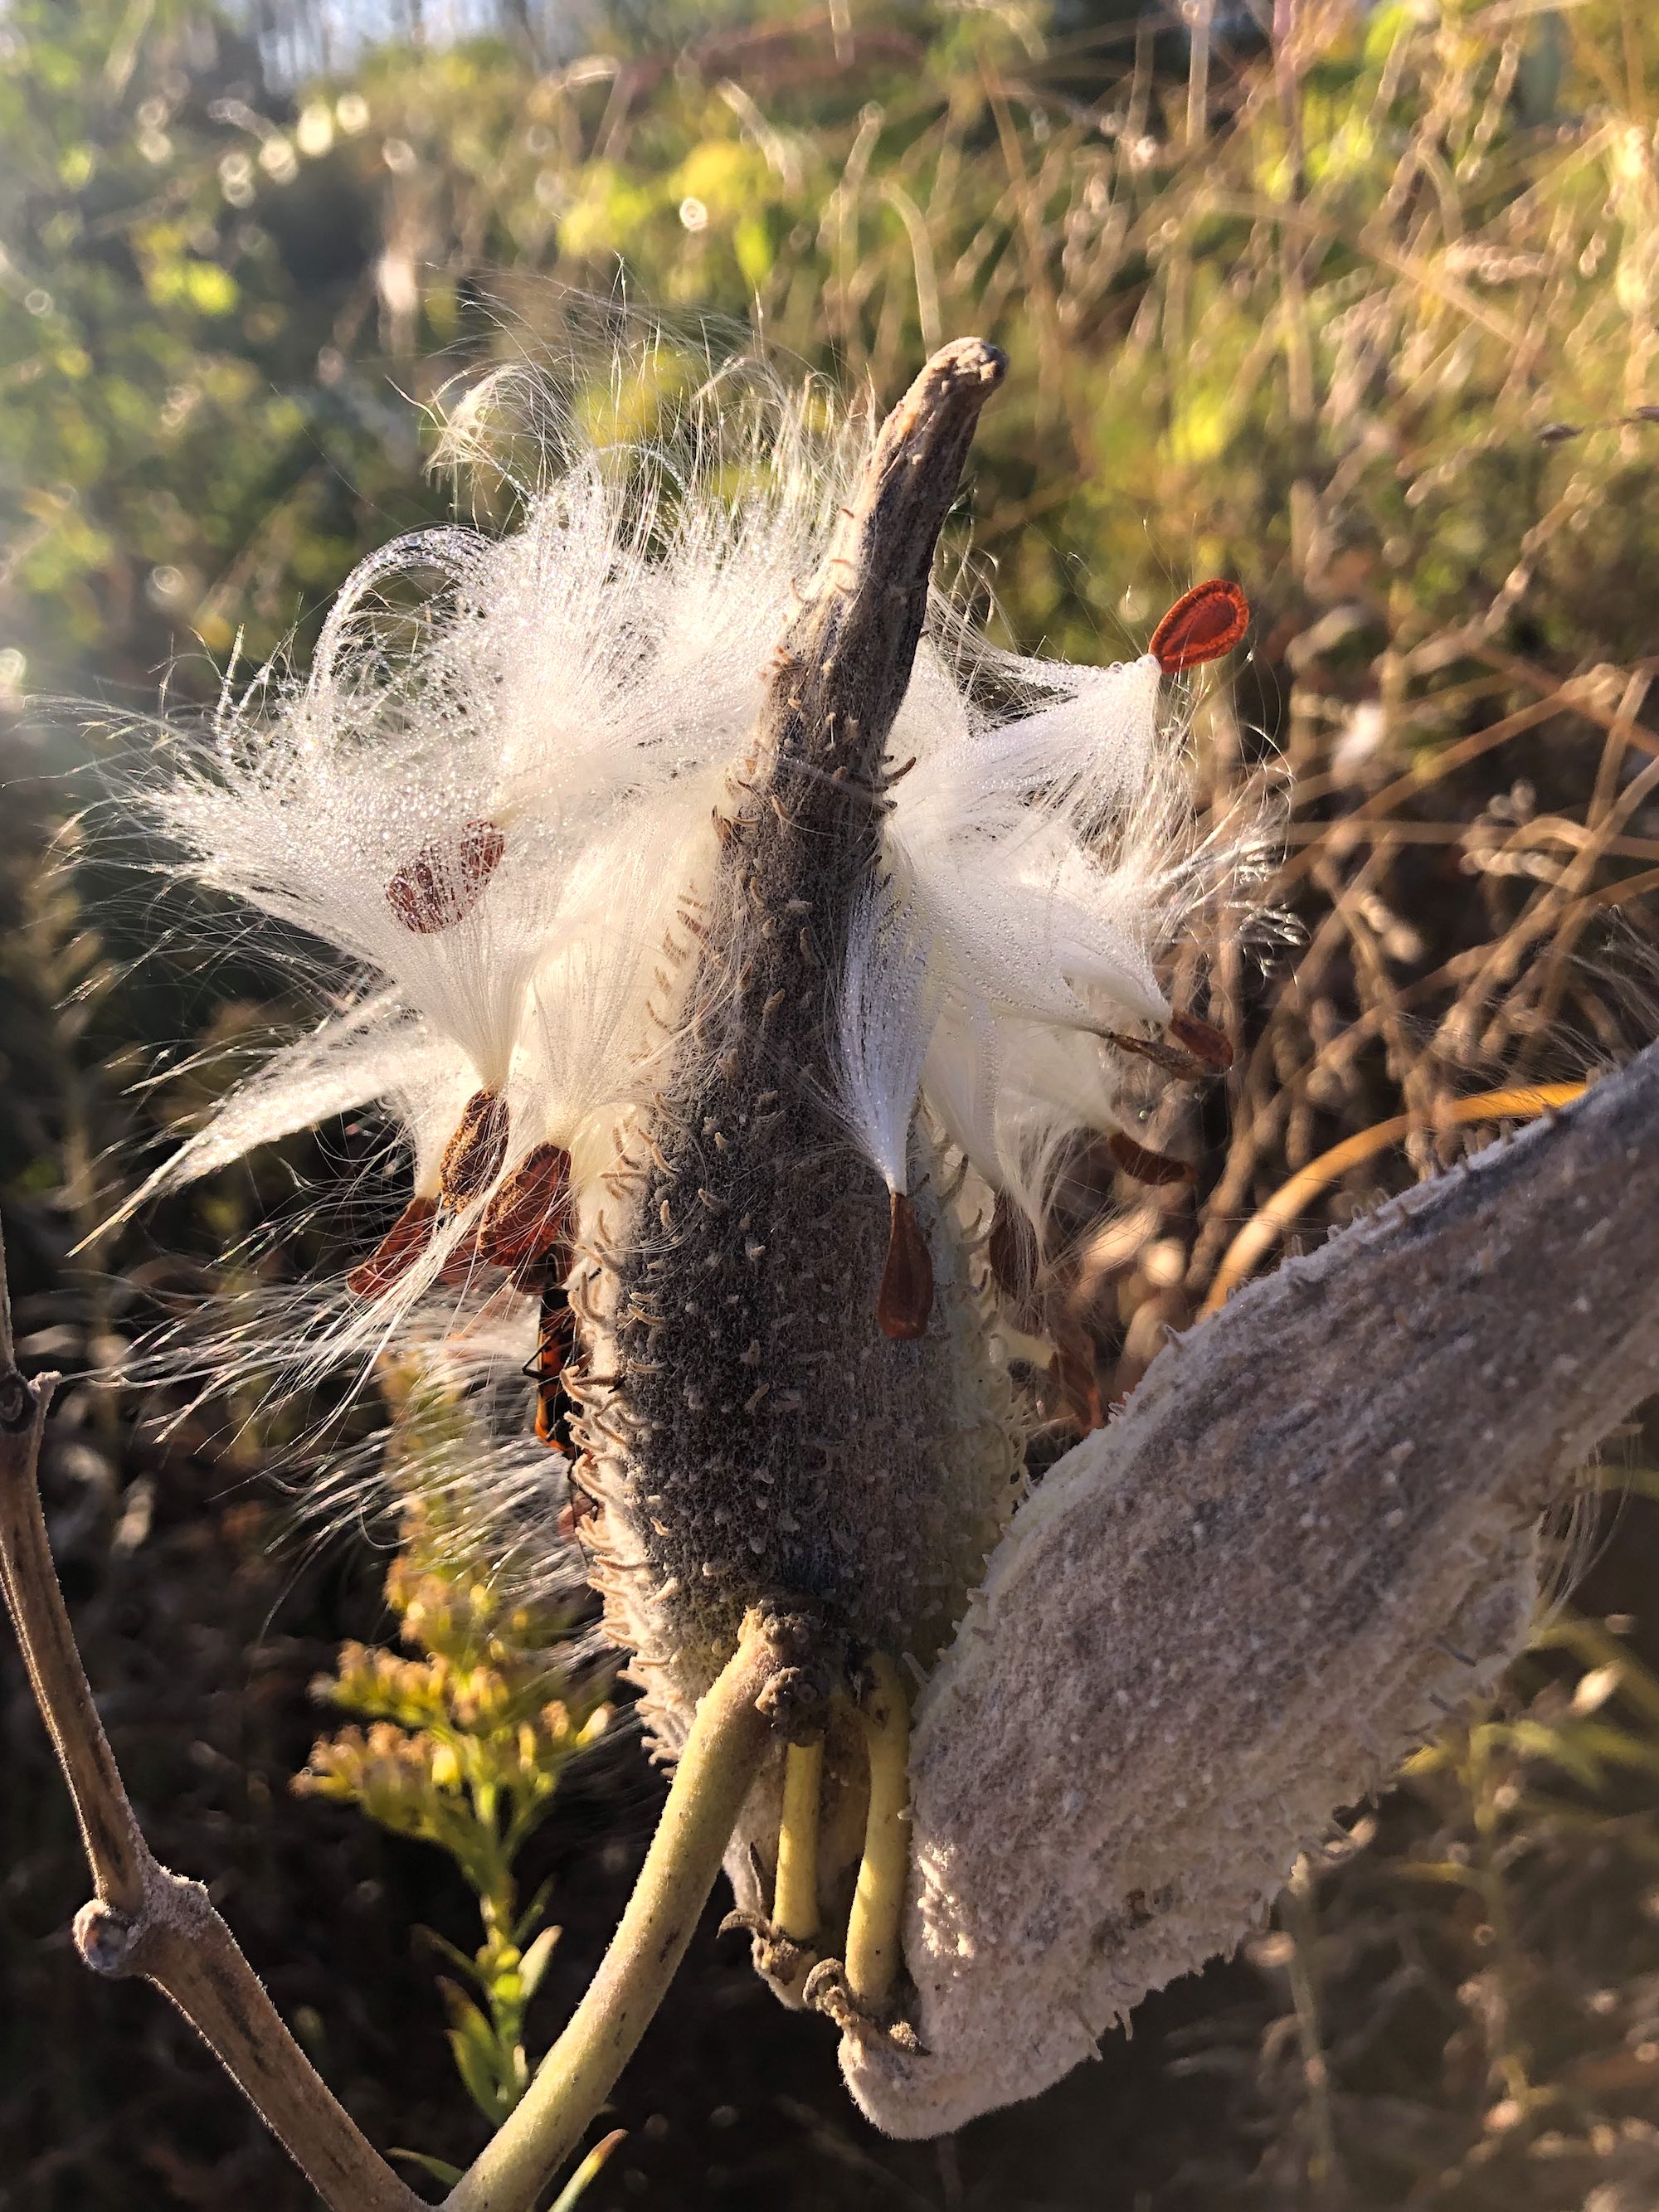 Common Milkweed on shore of Marion Dunn Pond on October 8, 2020.